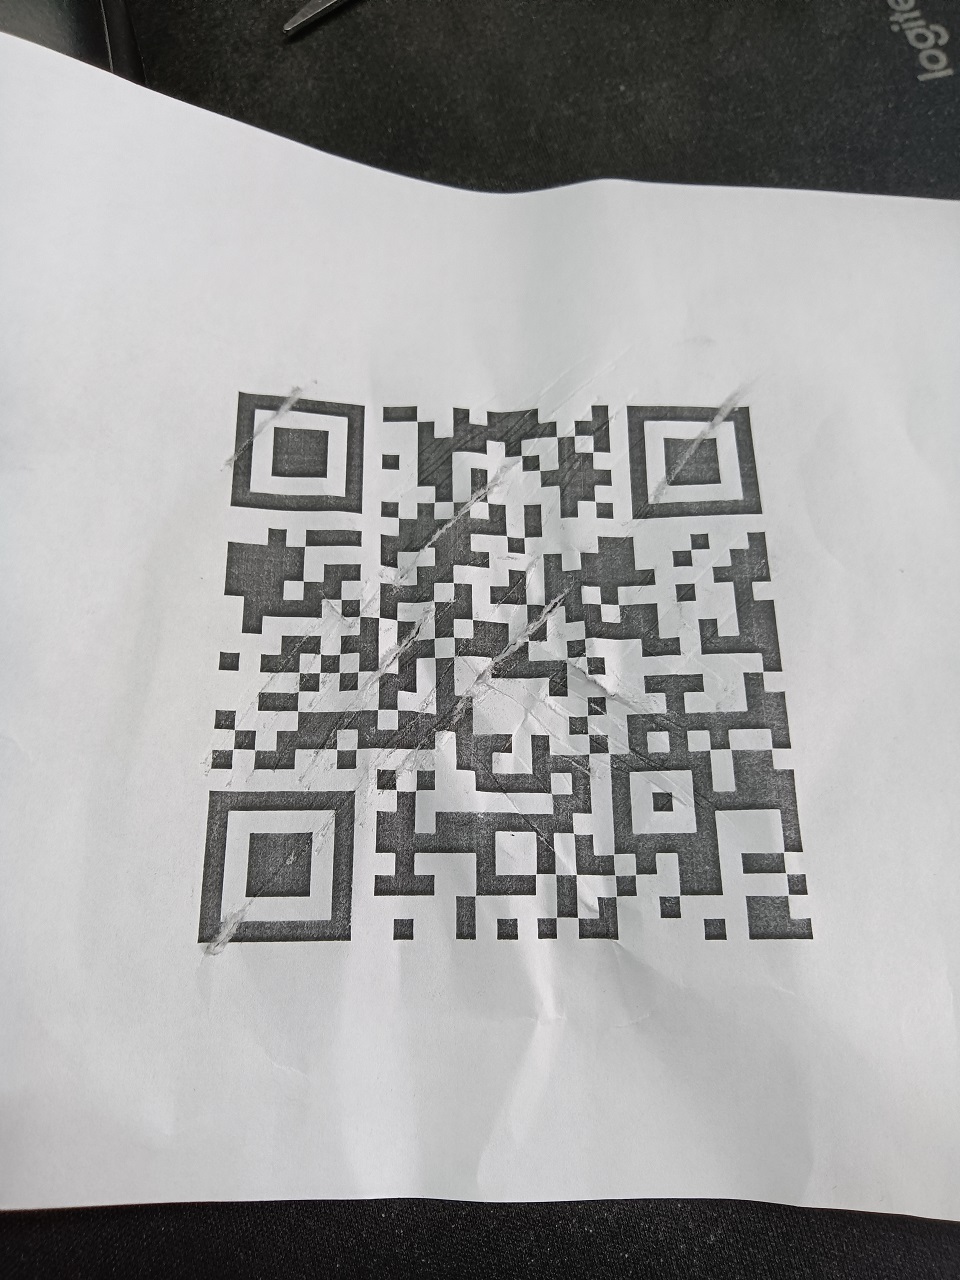 damaged qr code with marks